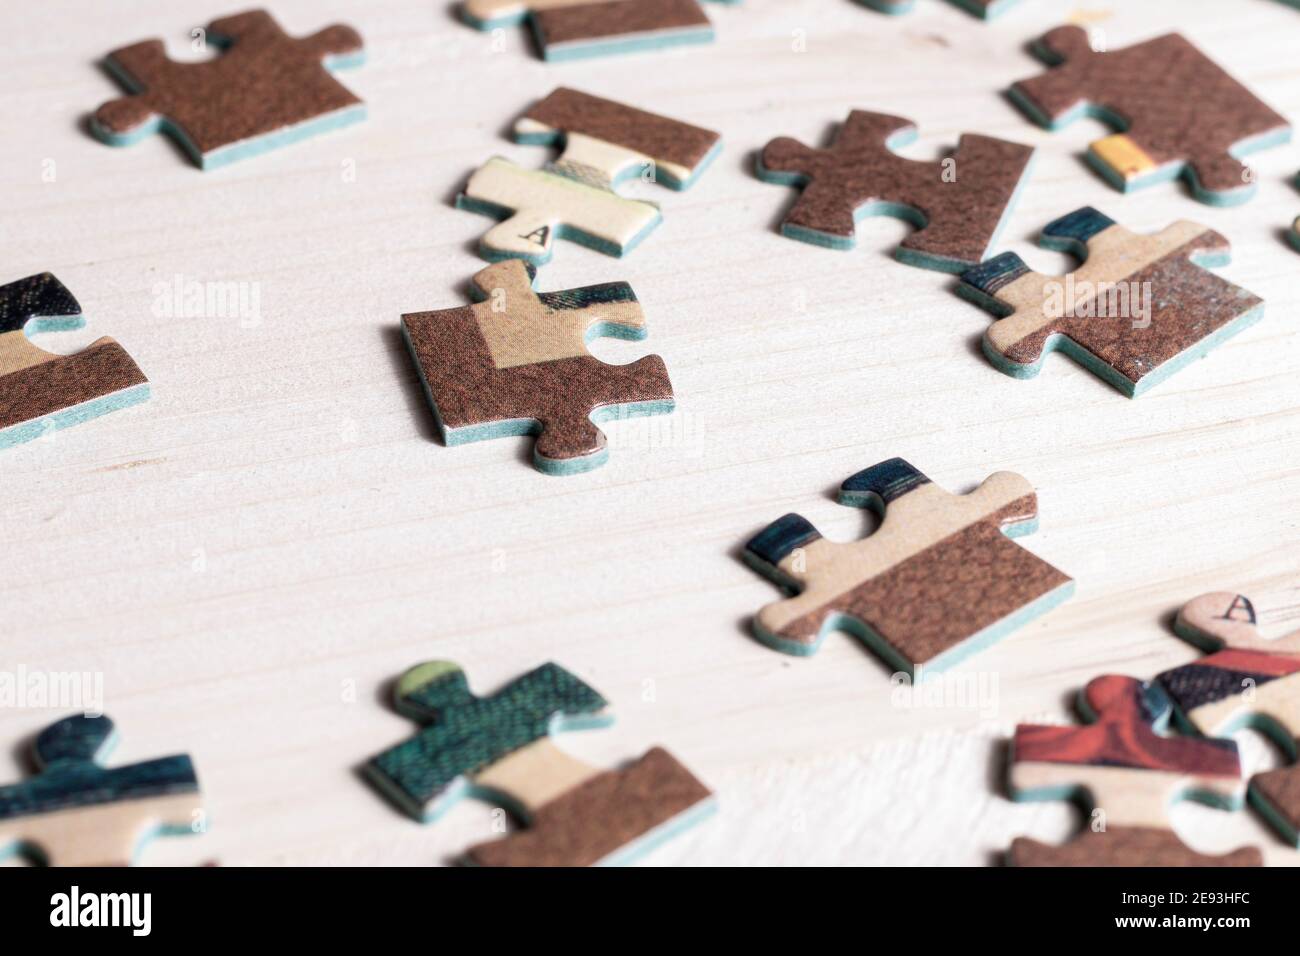 making a puzzle over a table Stock Photo